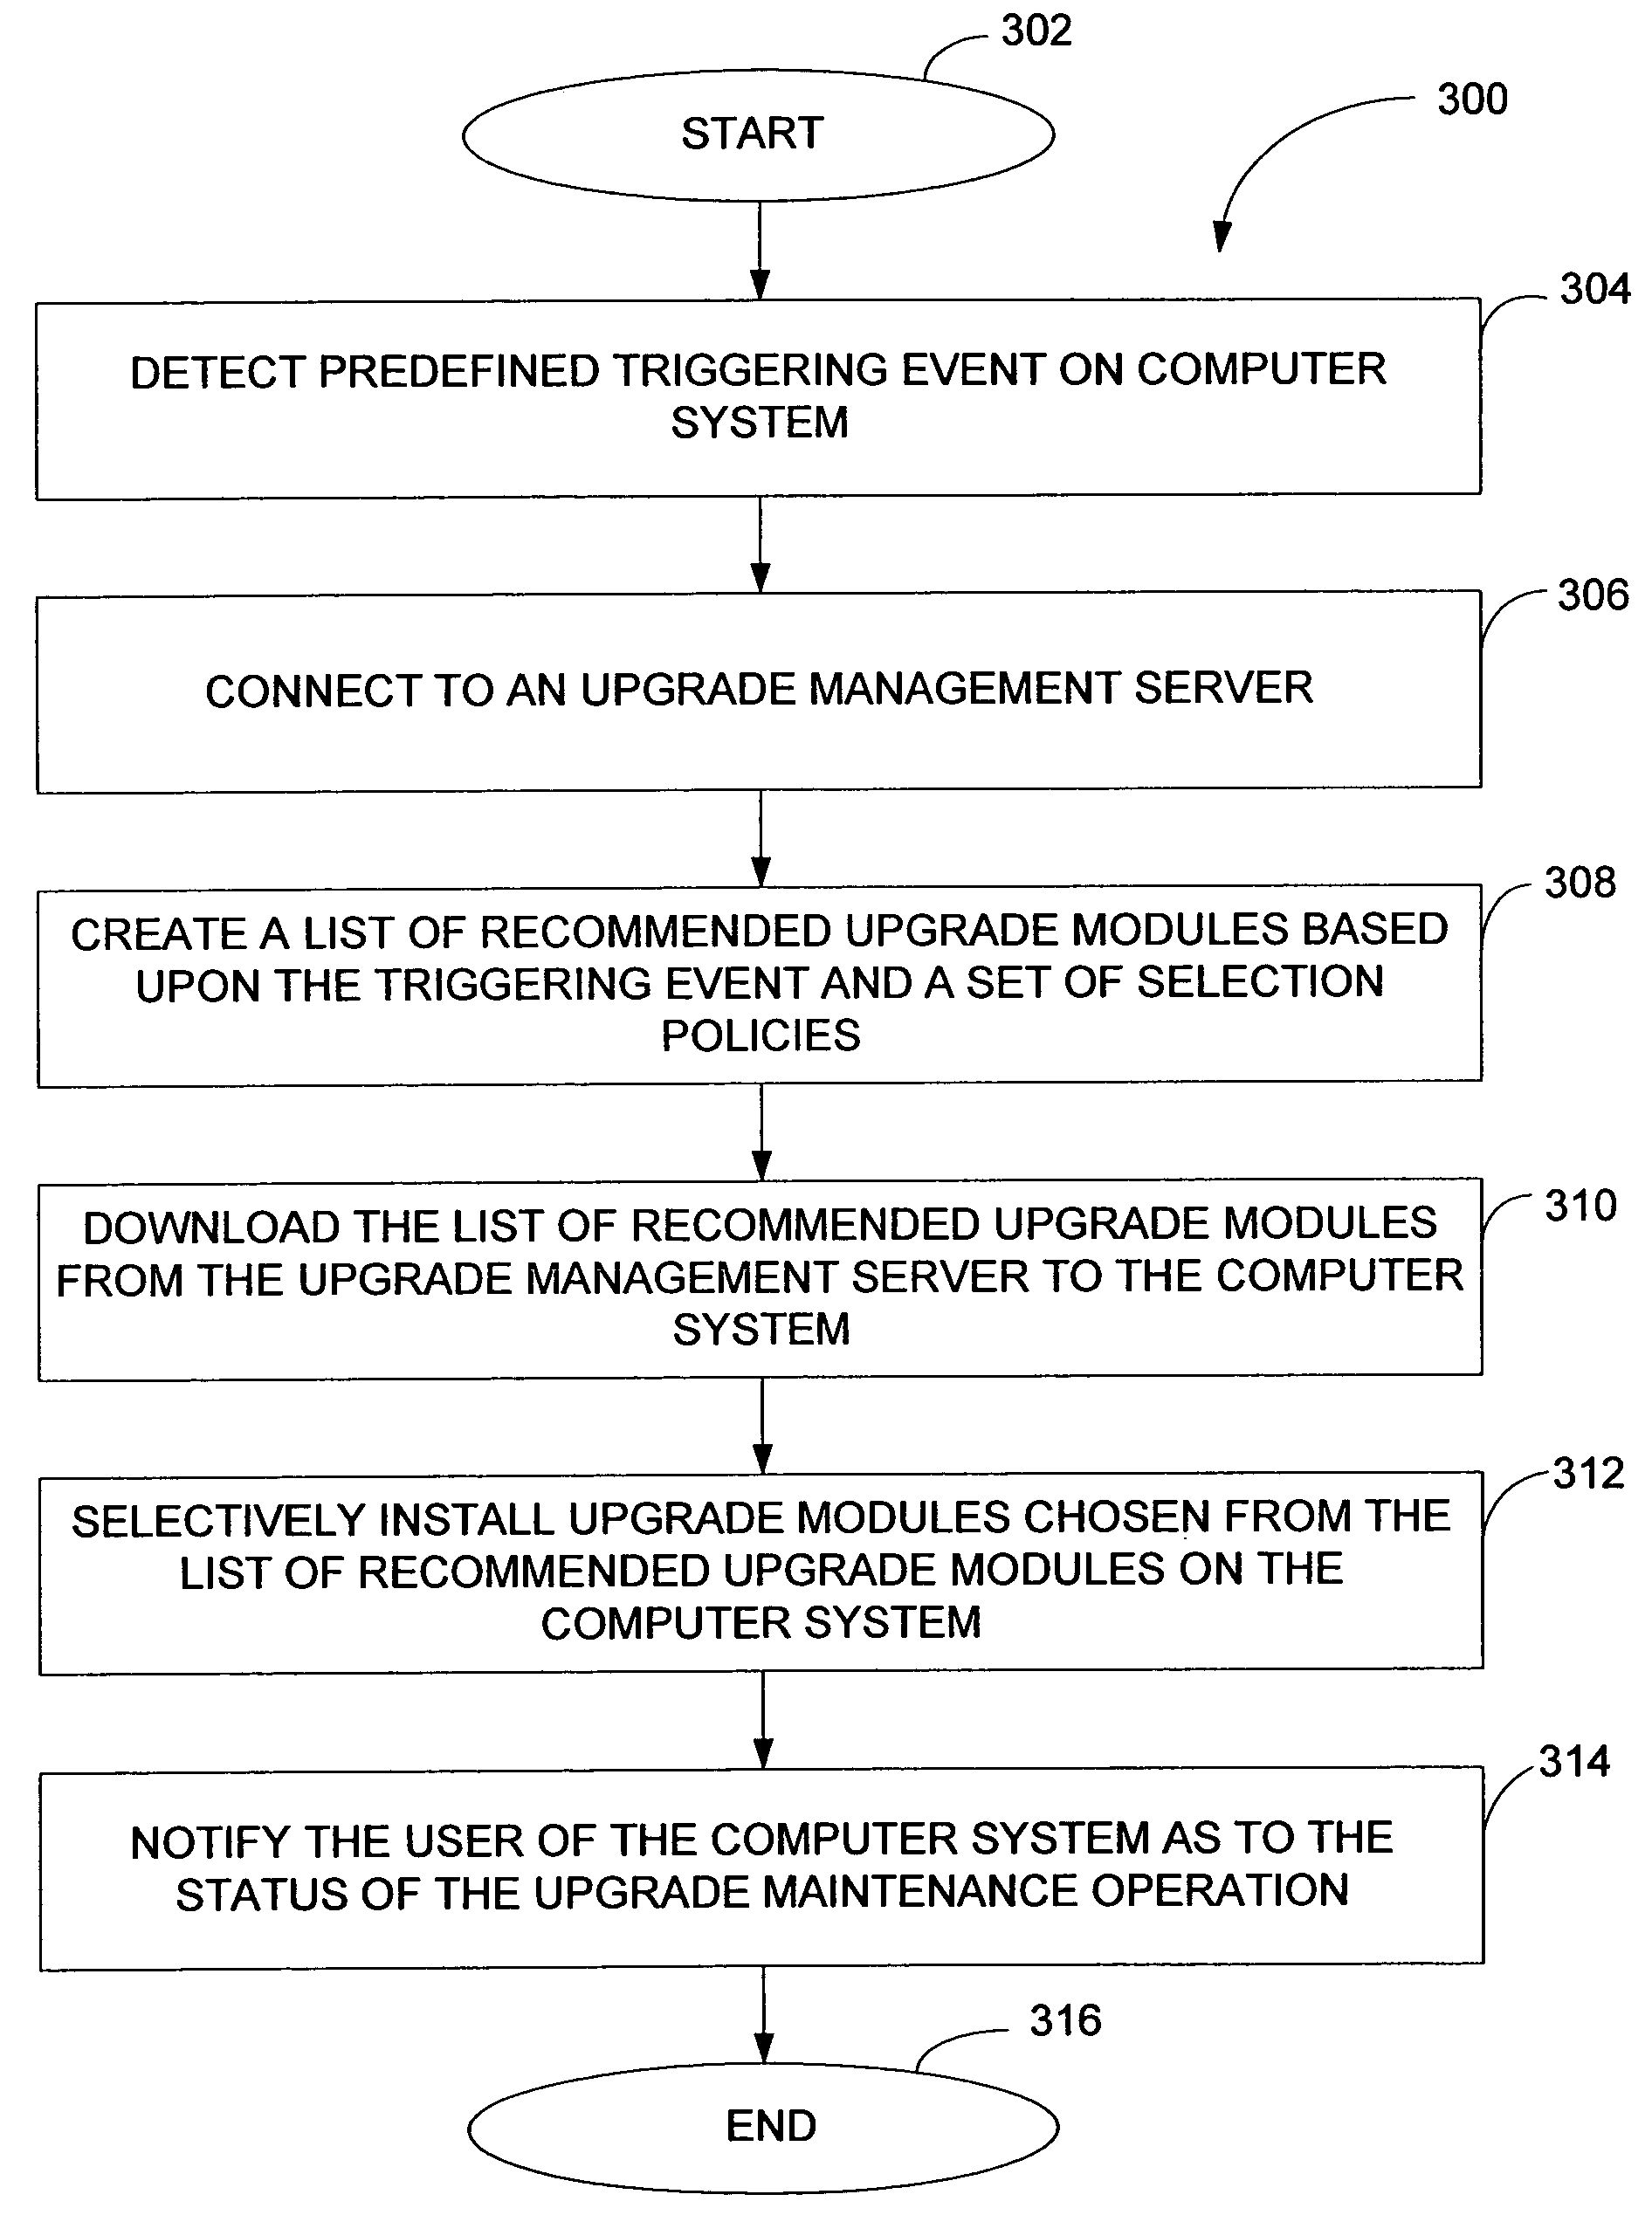 Computer application and methods for autonomic upgrade maintenance of computer hardware, operating systems and application software